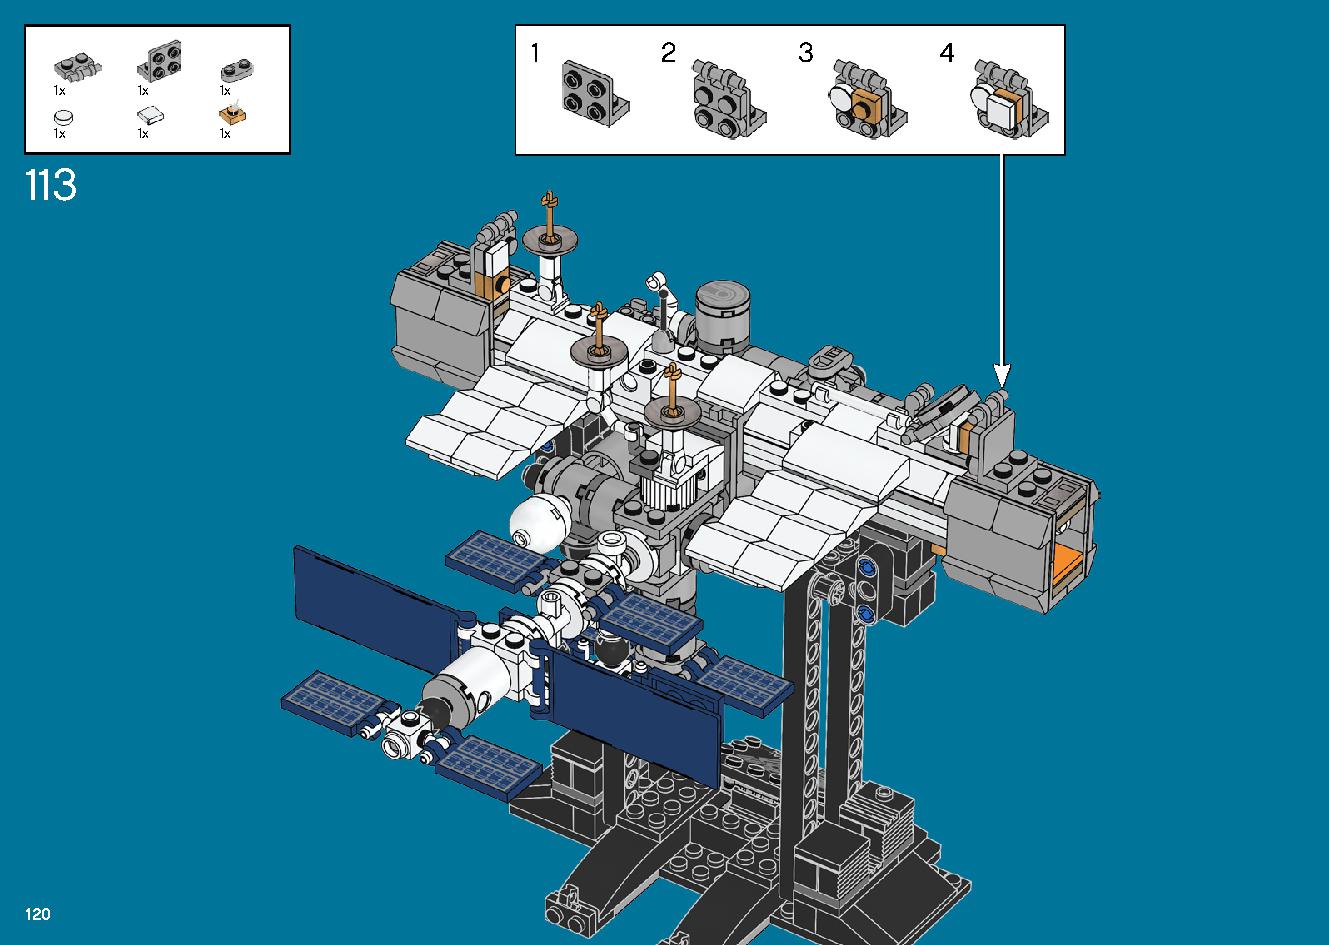 International Space Station 21321 LEGO information LEGO instructions 120 page